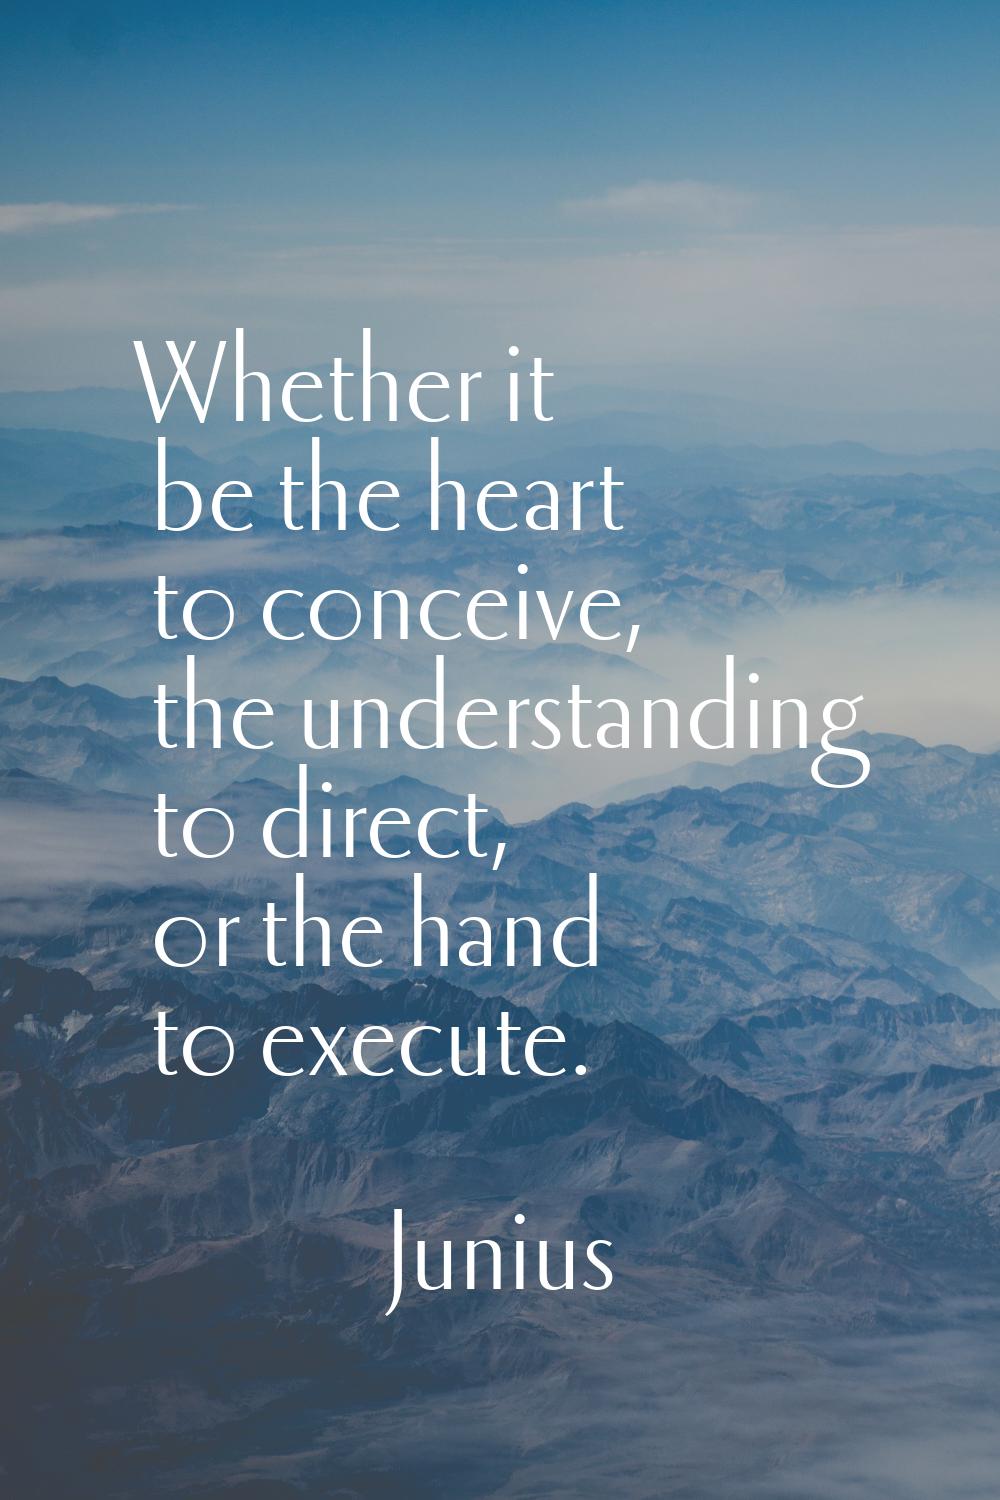 Whether it be the heart to conceive, the understanding to direct, or the hand to execute.